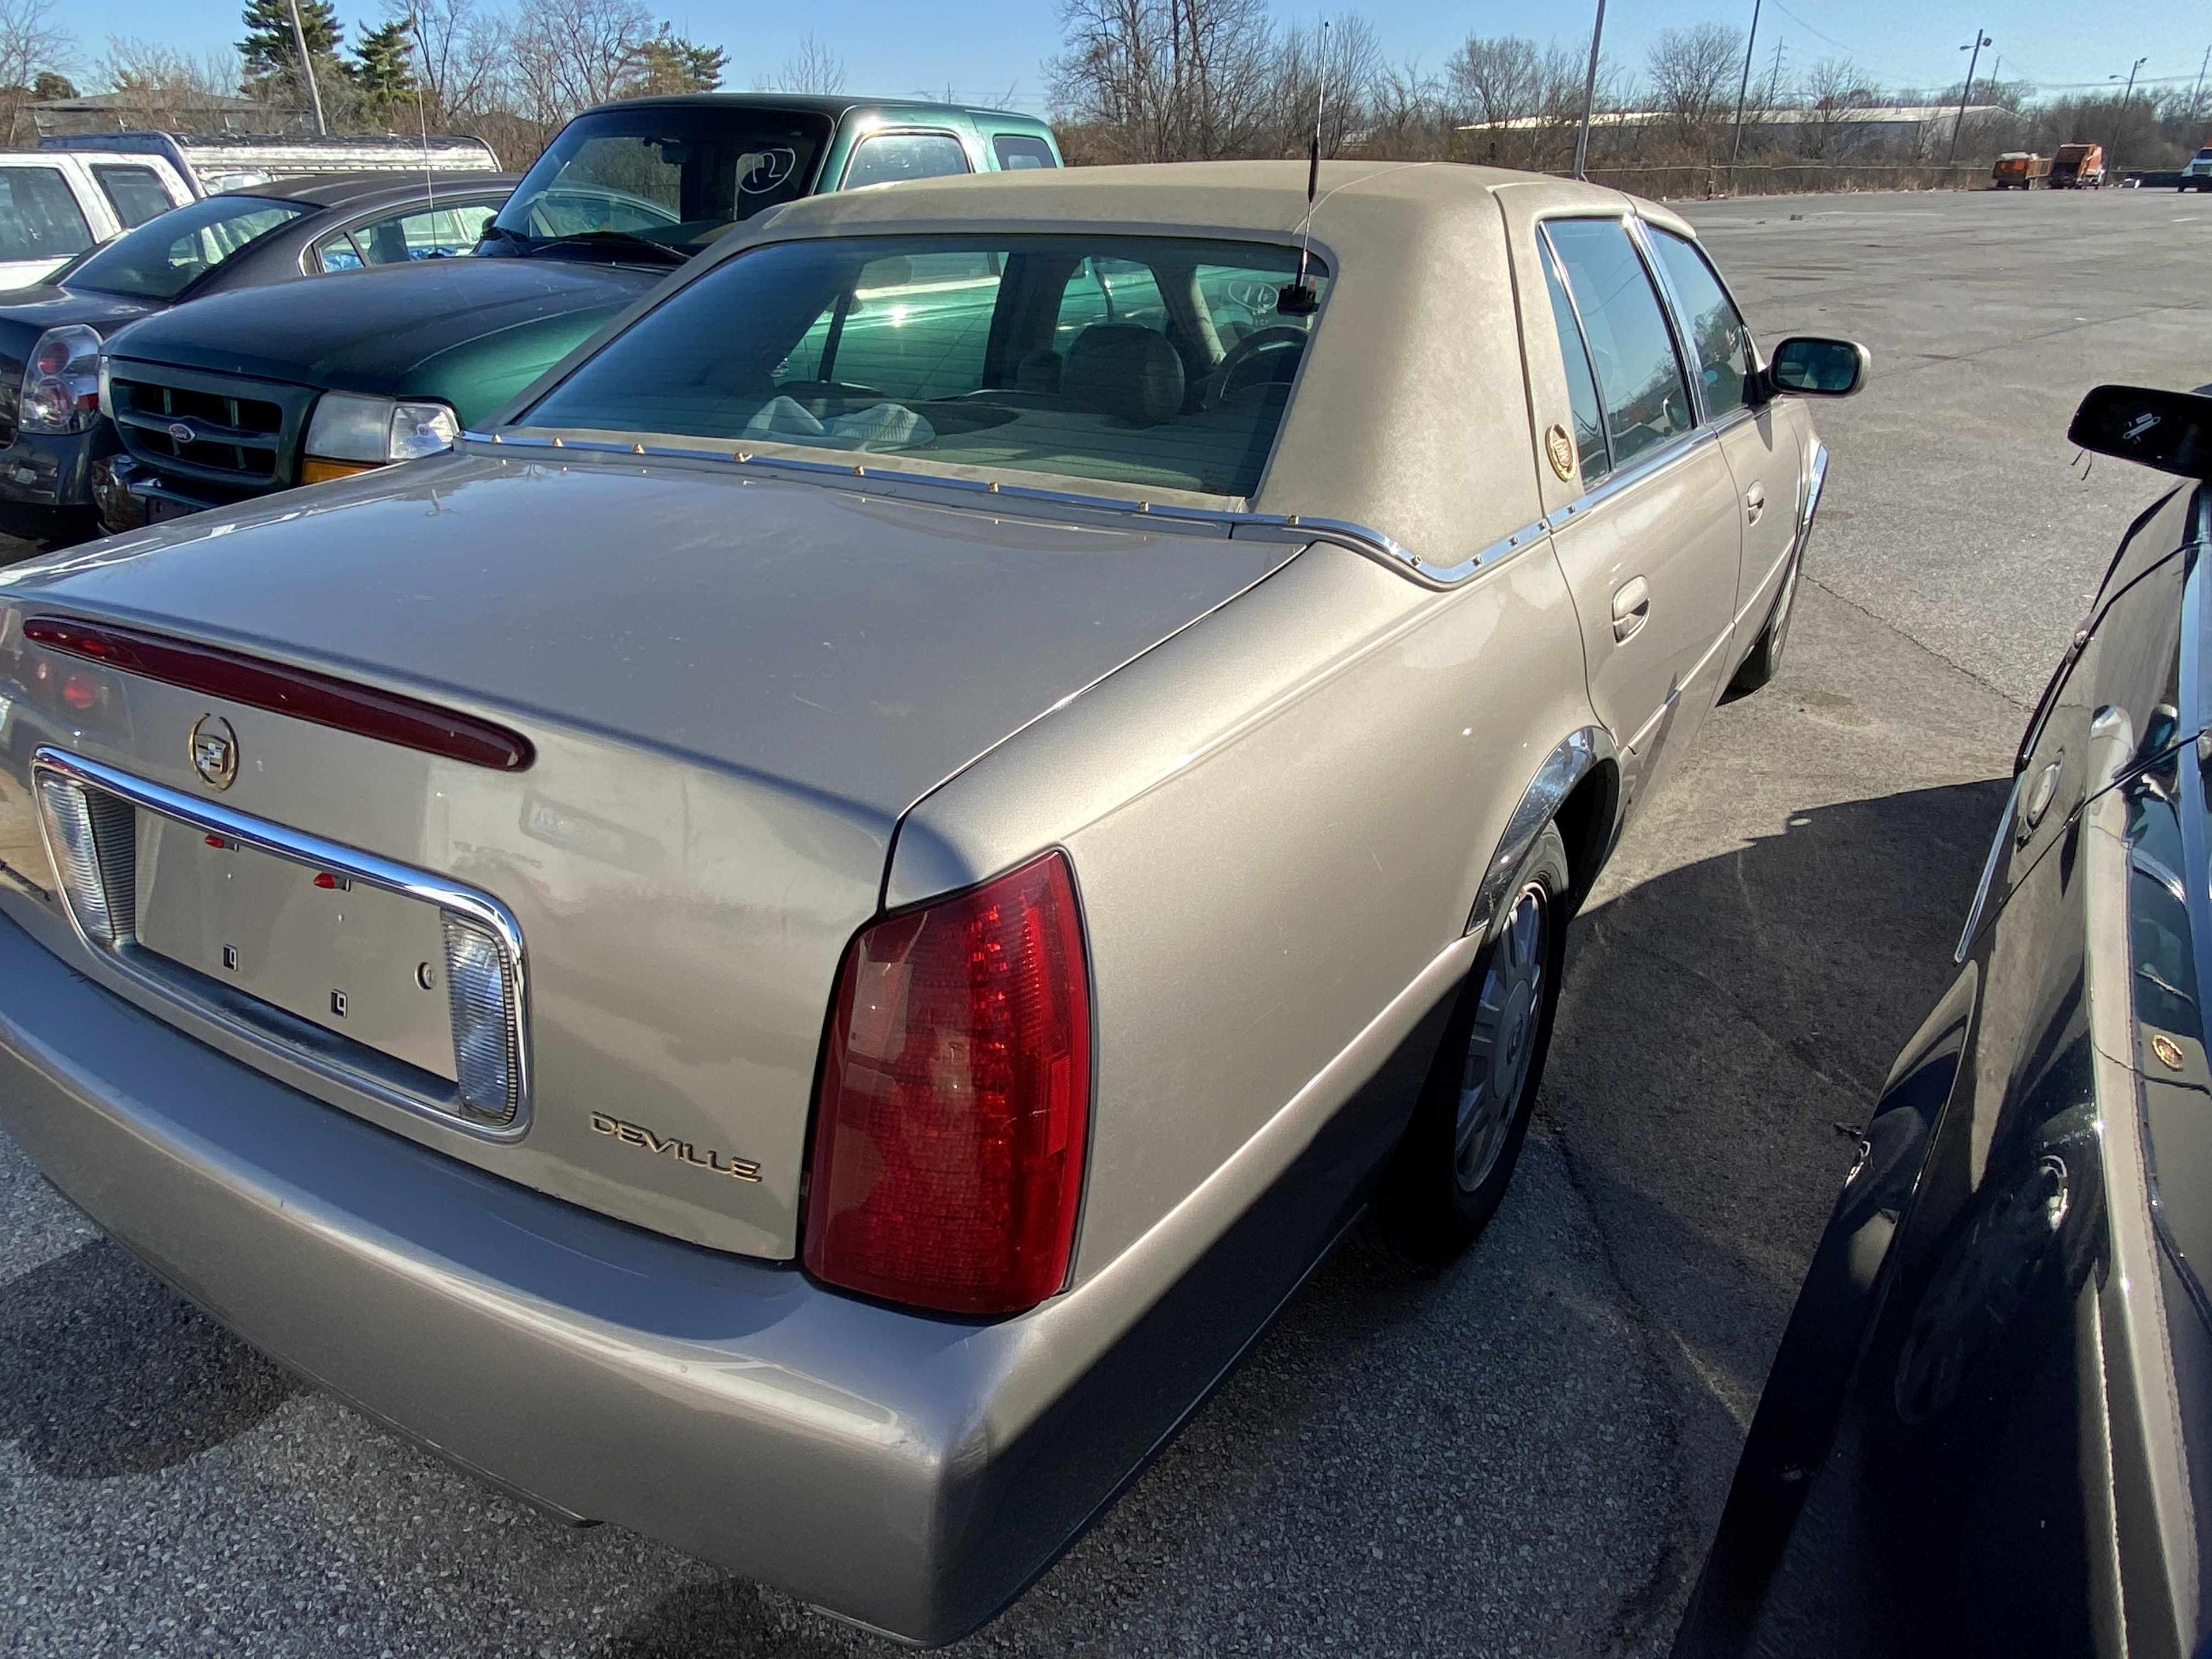 2003 Cadillac Deville with Bill of Sale Tow# 94552 Item 11